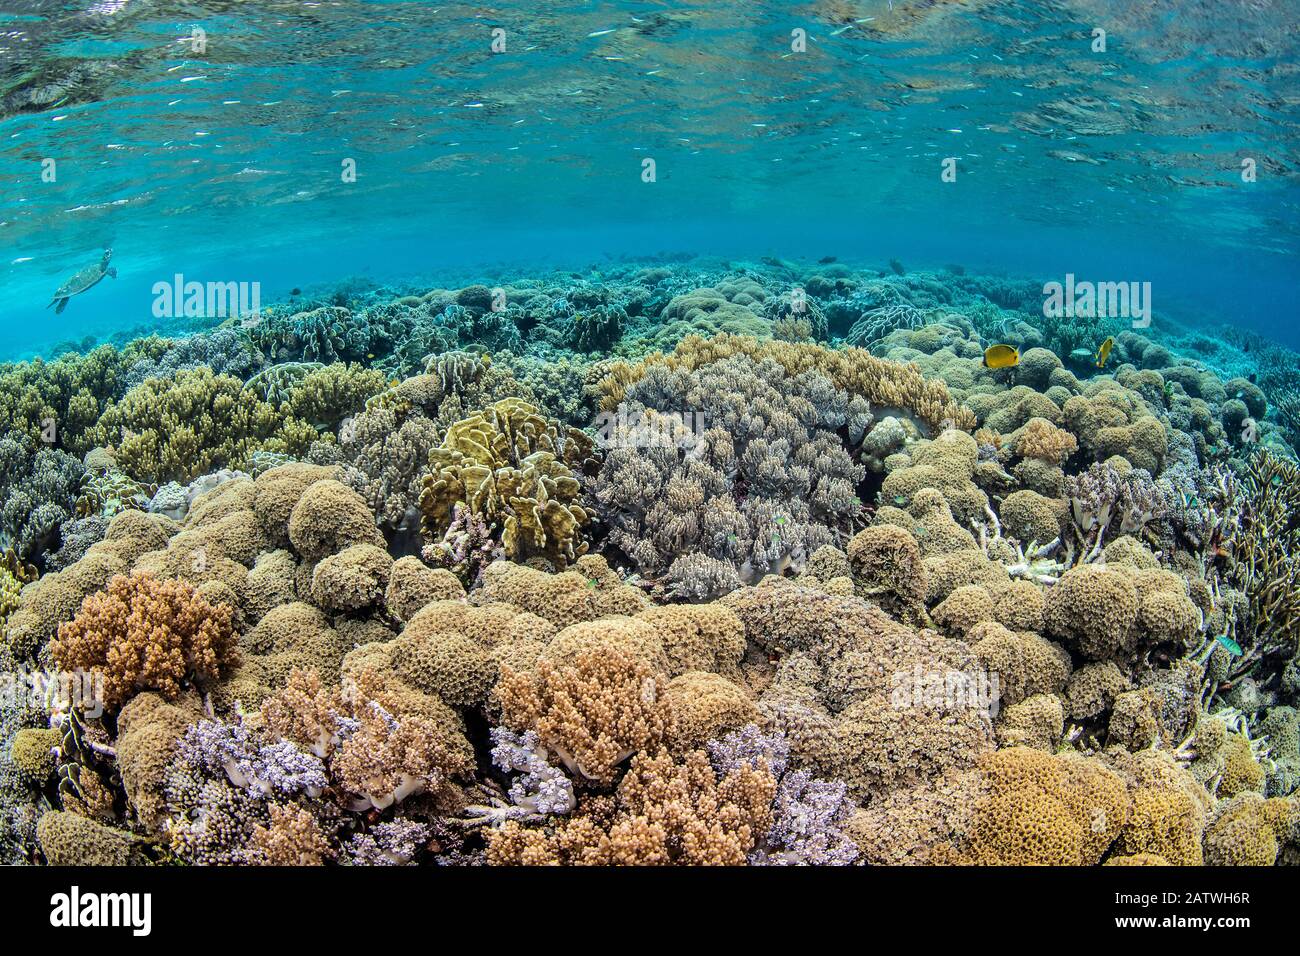 Coral (Lobophytum sp.) on a reef flat, with Hawksbill turtle (Eretmochelys imbricata) in background. Misool, Raja Ampat, West Papua, Indonesia. Ceram Sea. Tropical West Pacific Ocean. Stock Photo